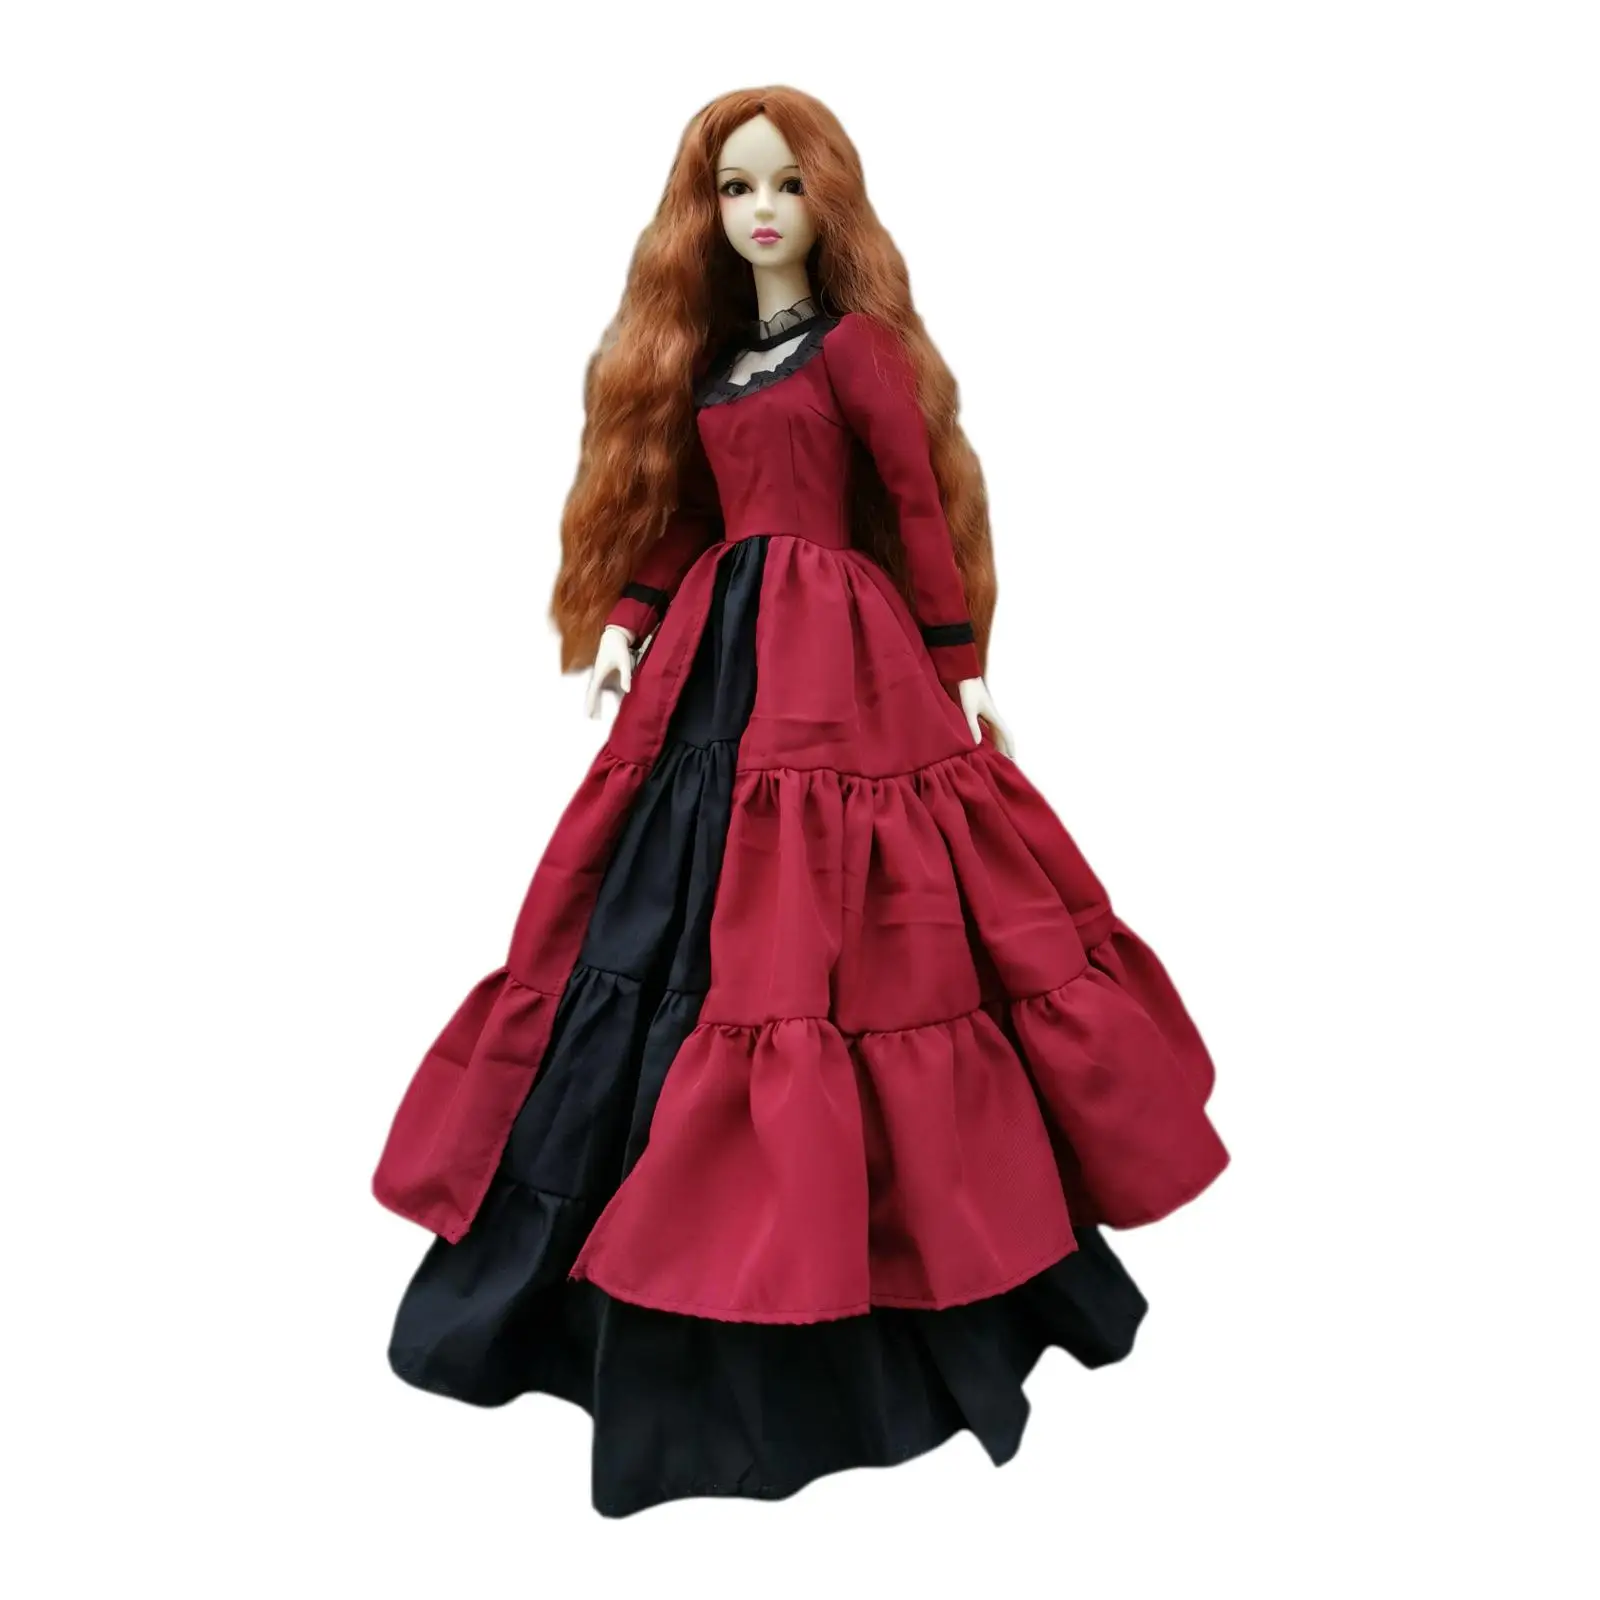 Ball Jointed Doll 1/3 Dolls with Beautiful Outfit and Doll Accessories Princess Doll Fashion 24 inch Doll for Girls